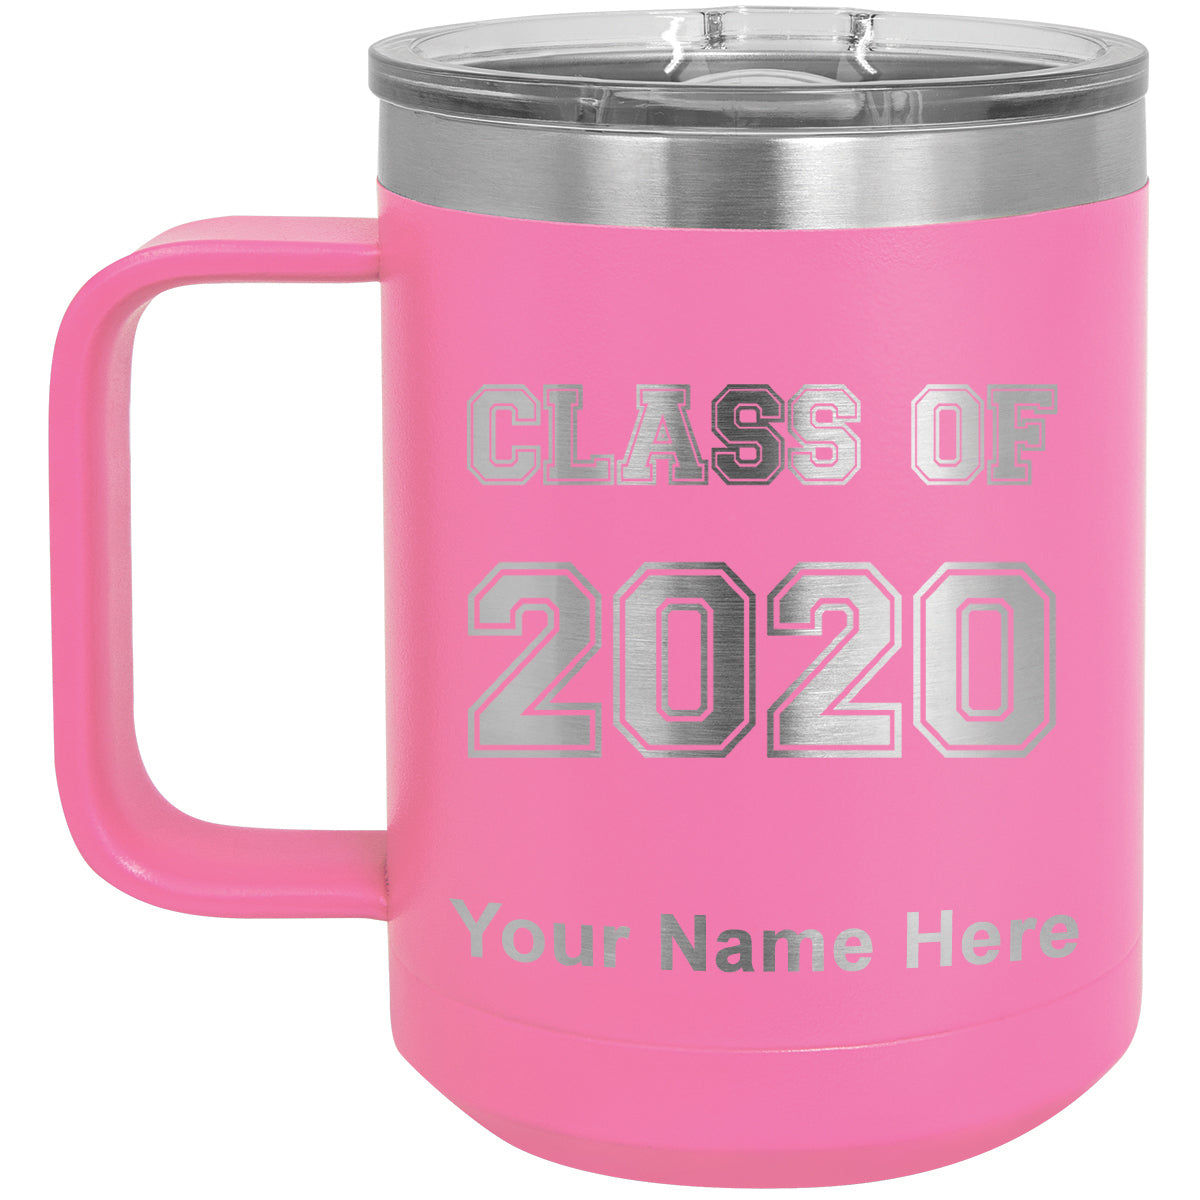 15oz Vacuum Insulated Coffee Mug, Class of 2020, 2021, 2022, 2023 2024, 2025, Personalized Engraving Included